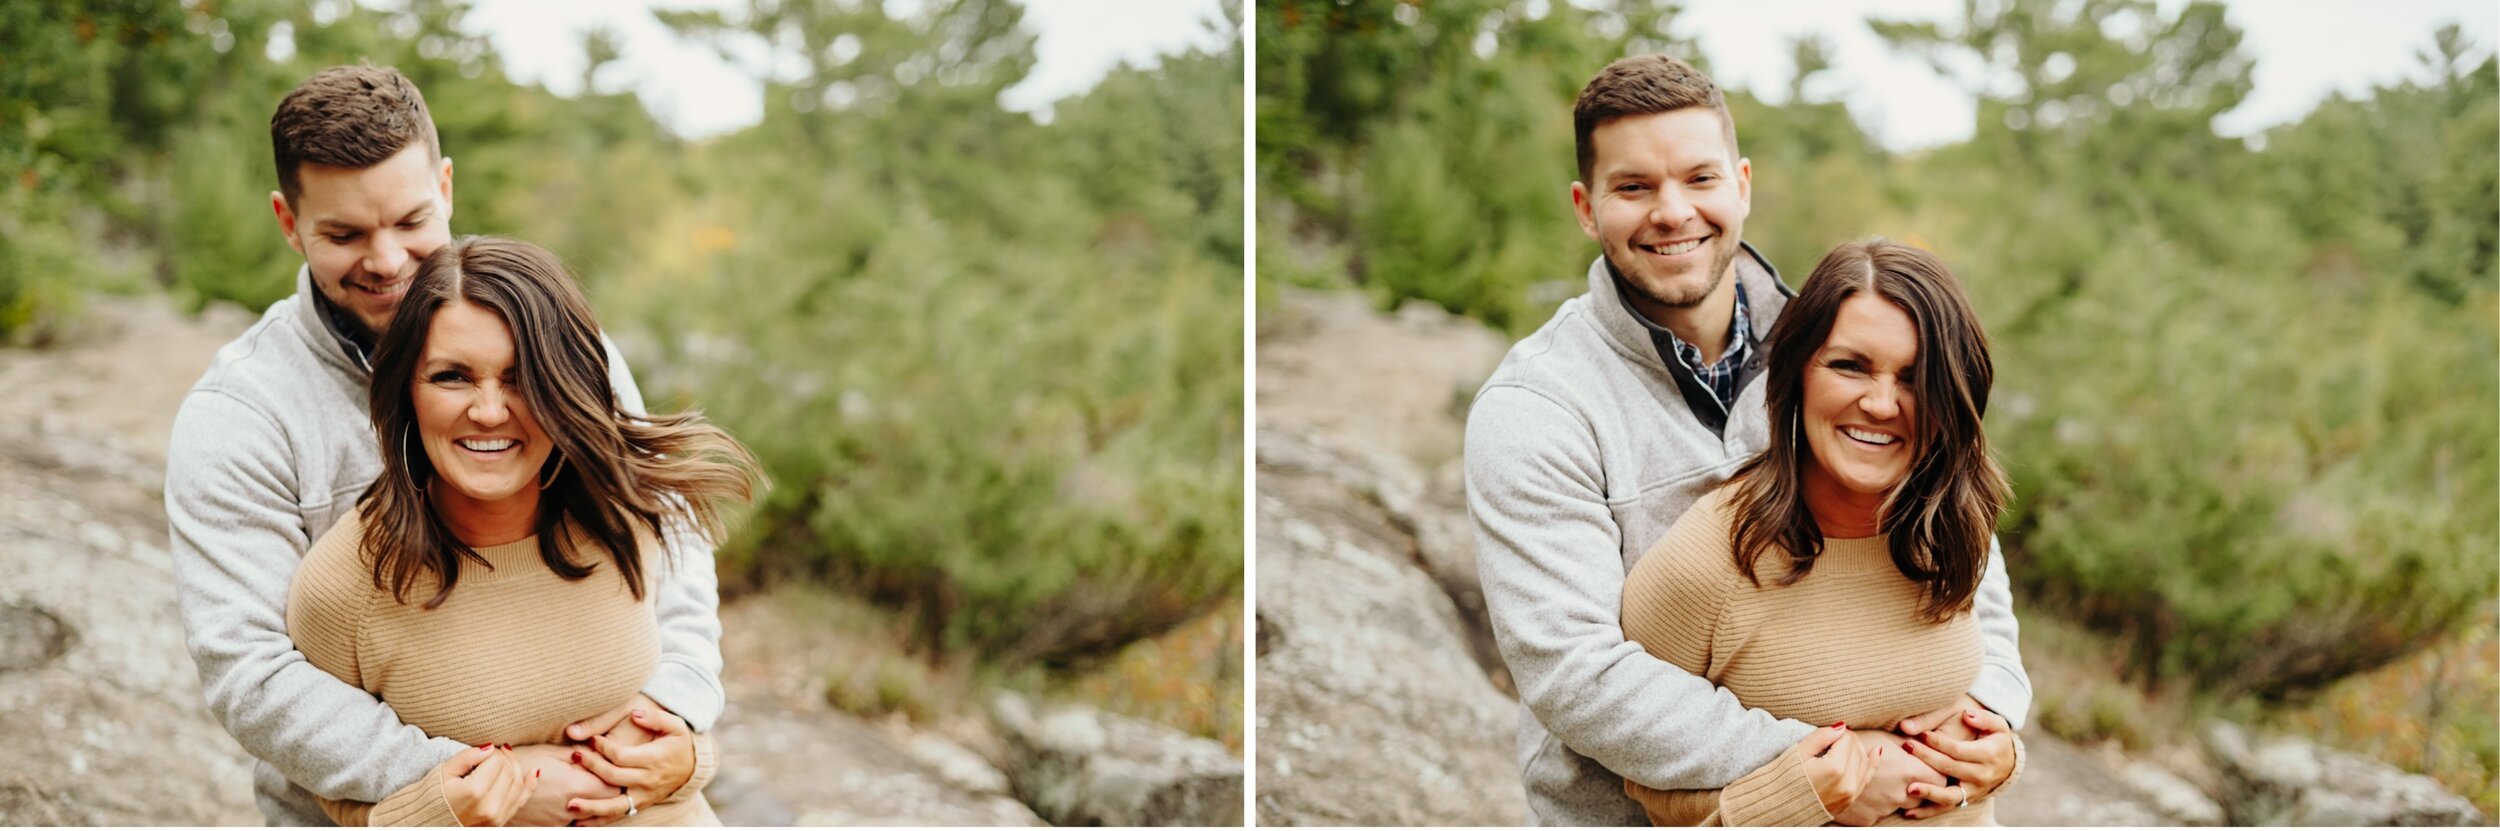 29_taylors-falls-engagement-session-interstate-park-mckenzie-josh-54_taylors-falls-engagement-session-interstate-park-mckenzie-josh-53.jpg